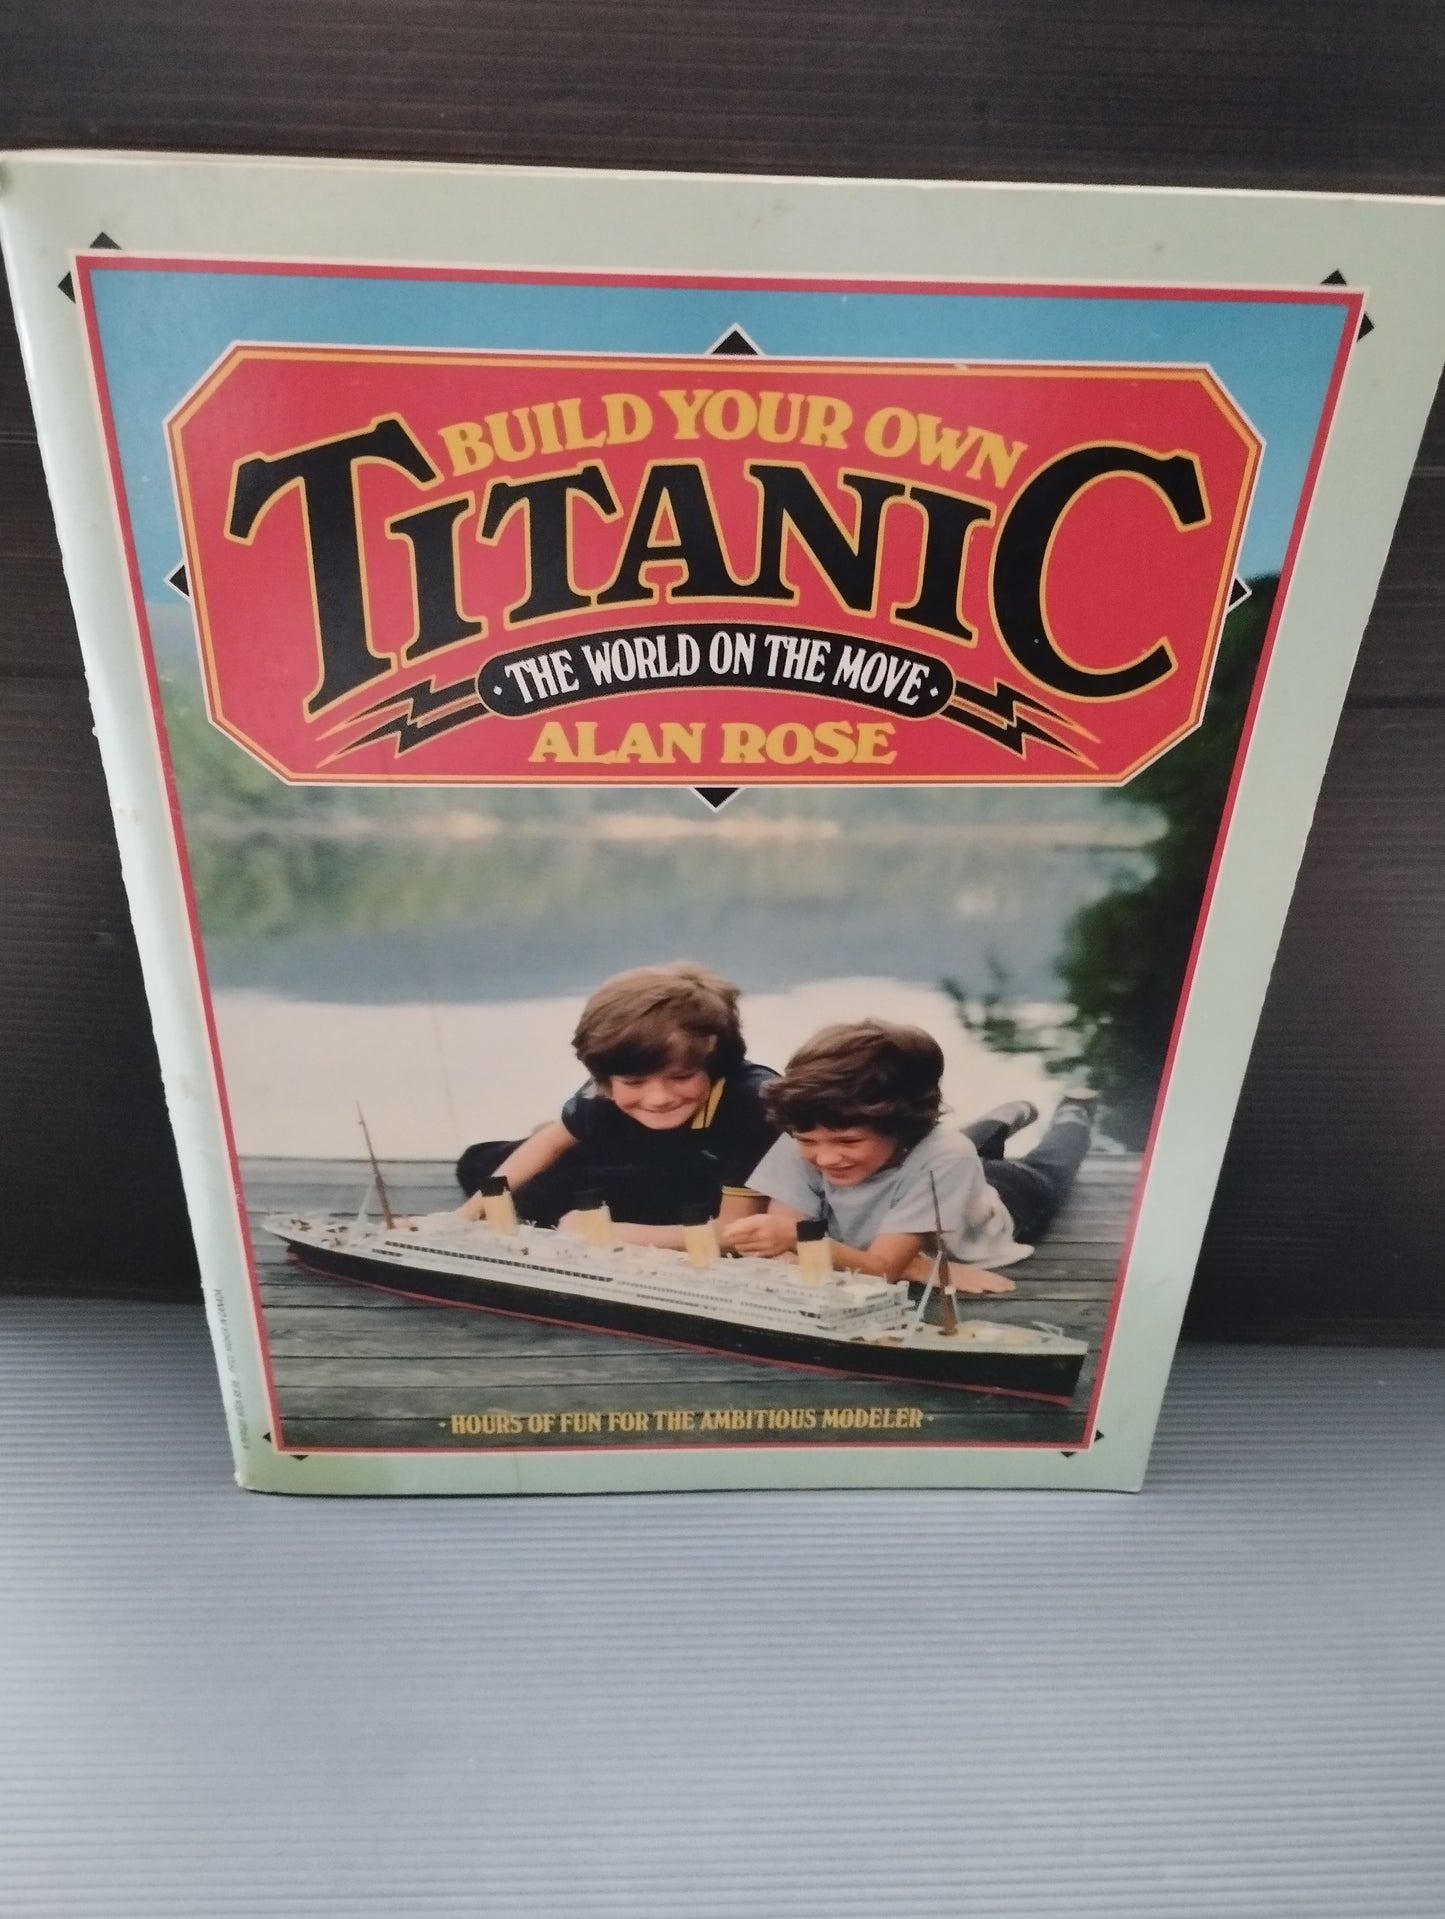 Titanic Alan Rose model book

 Published in 1981 by Perigee Books